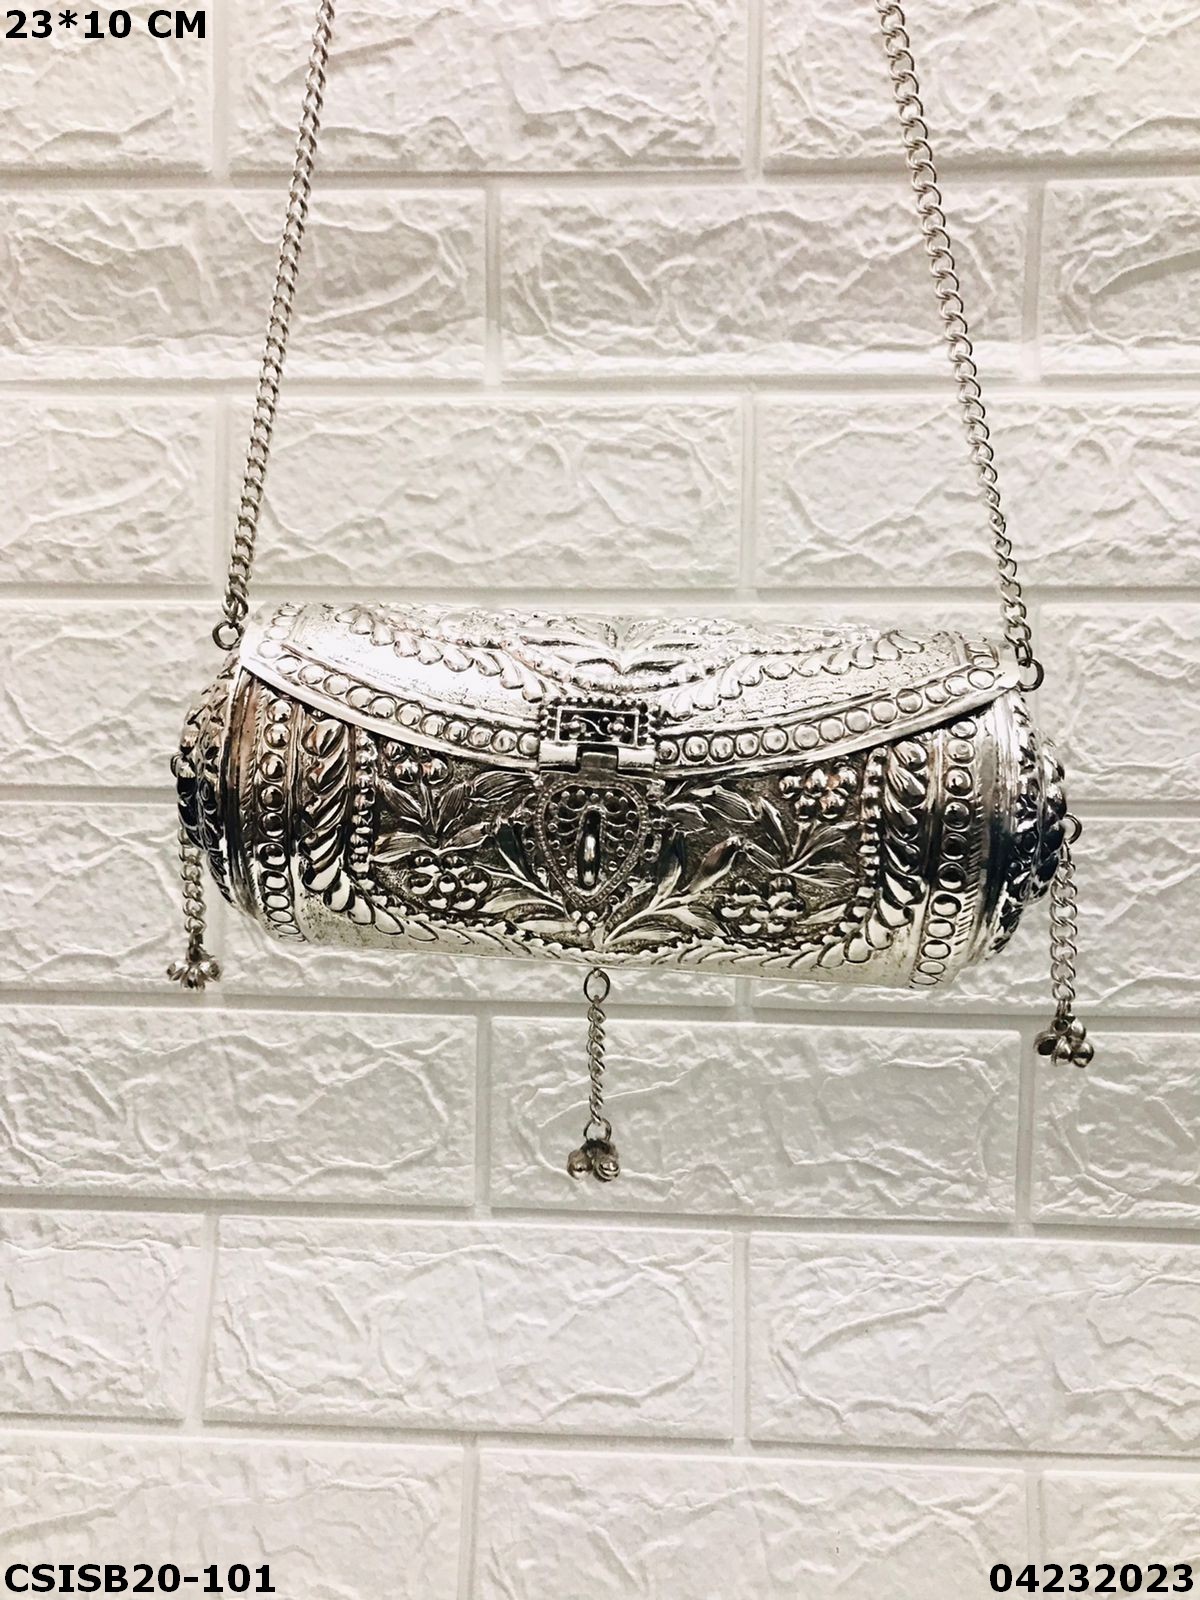 Brass Silver clutch with handle | Clutches and More